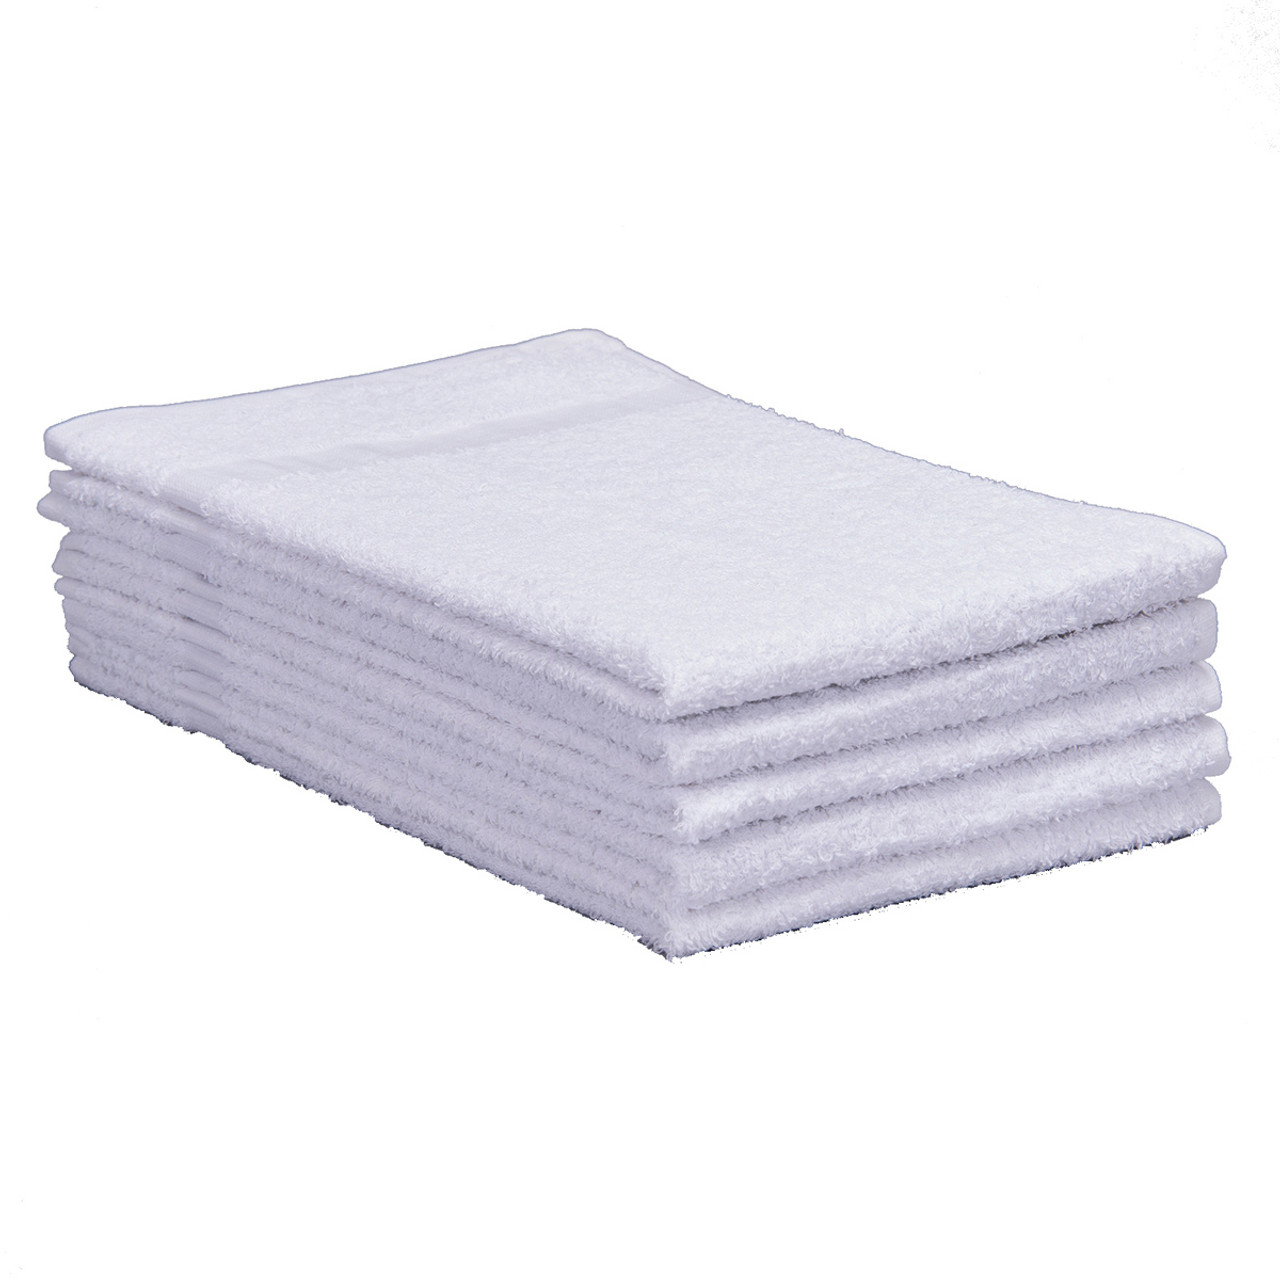 https://cdn11.bigcommerce.com/s-a5uwe4c7wz/images/stencil/1280x1280/products/488/1828/Towels-Medium-Weight-Cotton-Terry-16x27-White__97467.1587390023.jpg?c=1